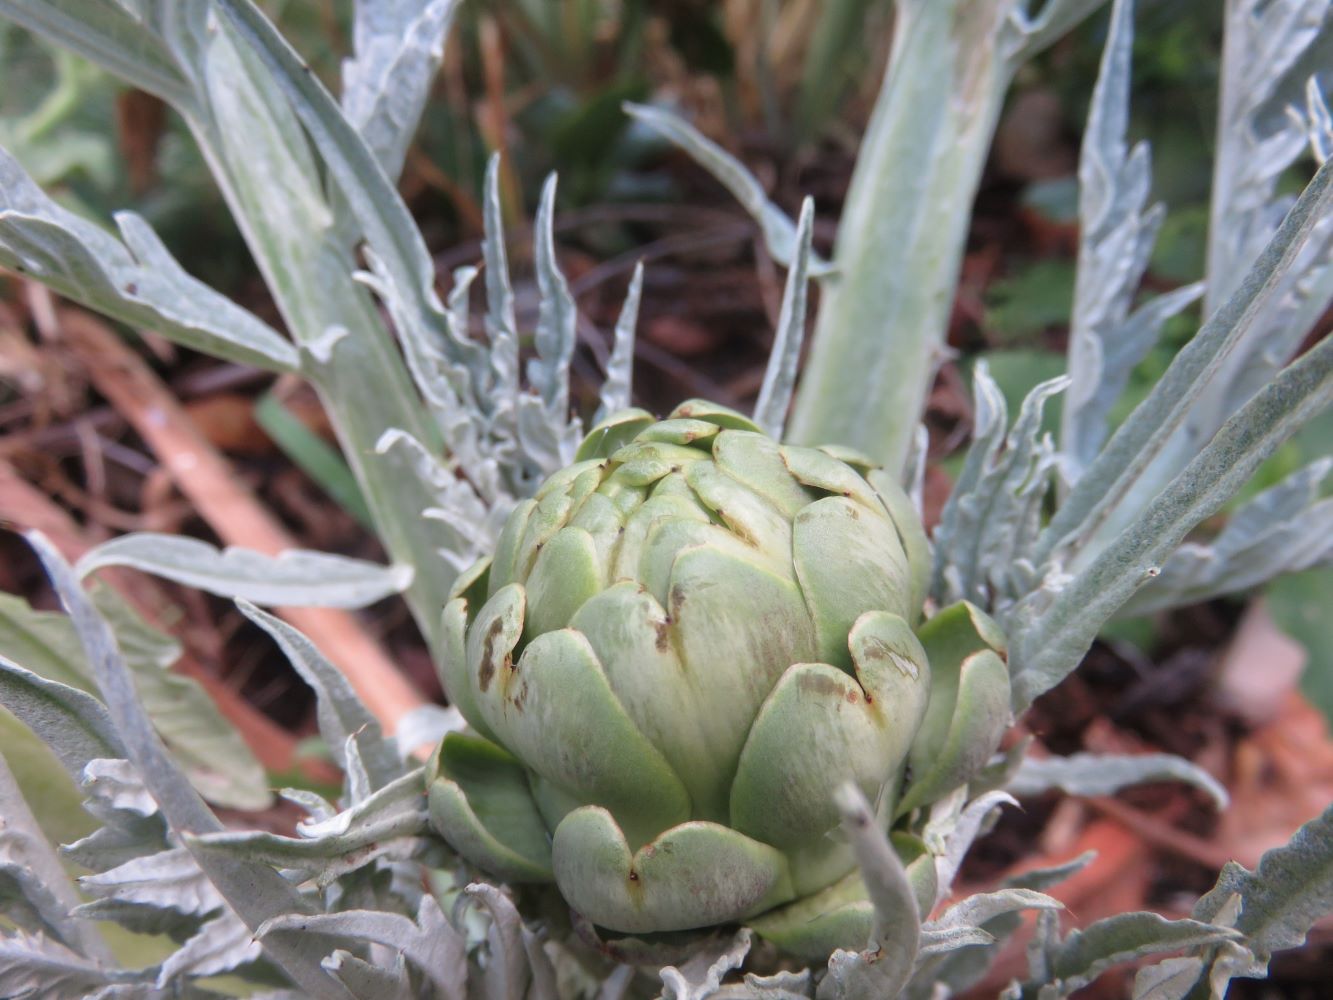 My first artichoke head, growing under the guava tree.